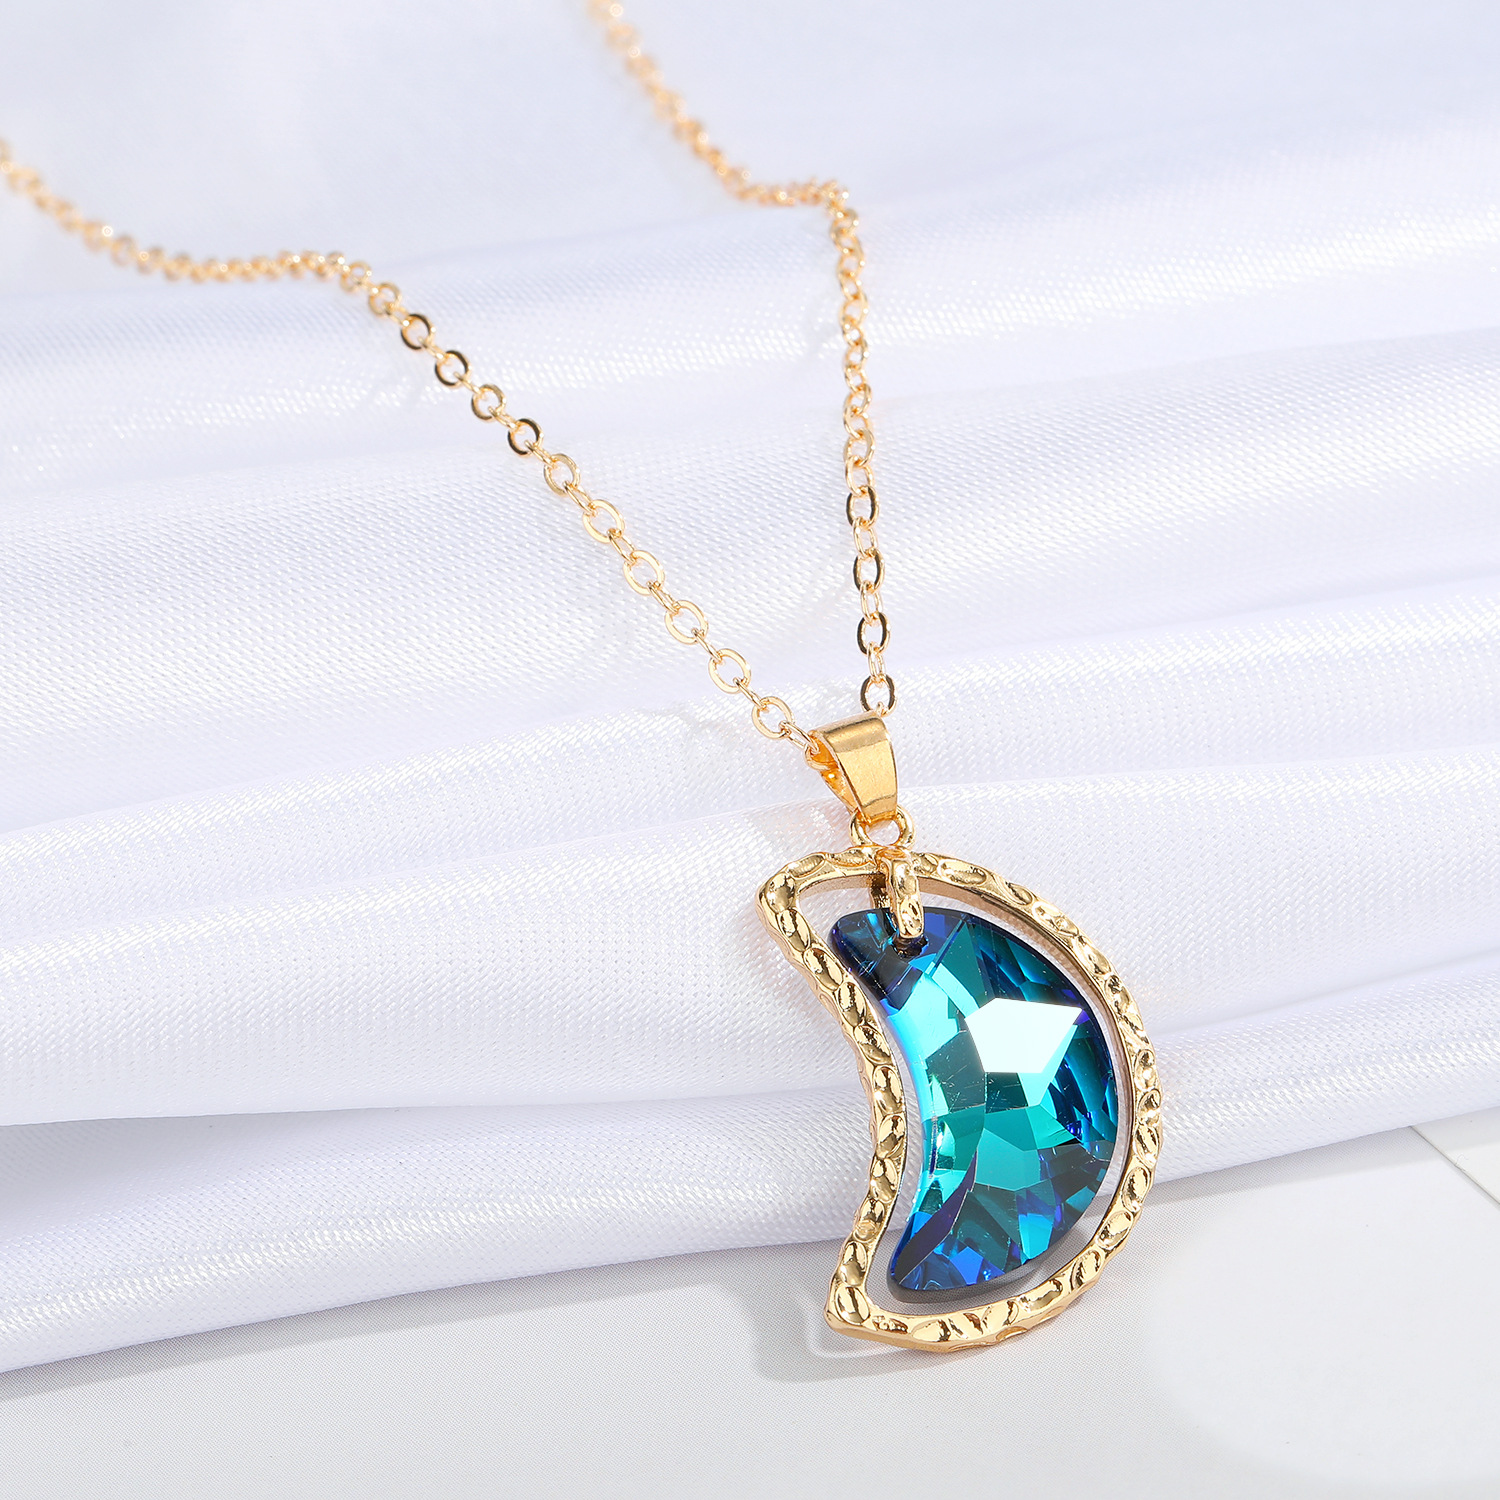 European CrossBorder Sold Jewelry Blue Crystal Glass Necklace Simple Star and Moon Pendant Clavicle Chain Female Necklacepicture5